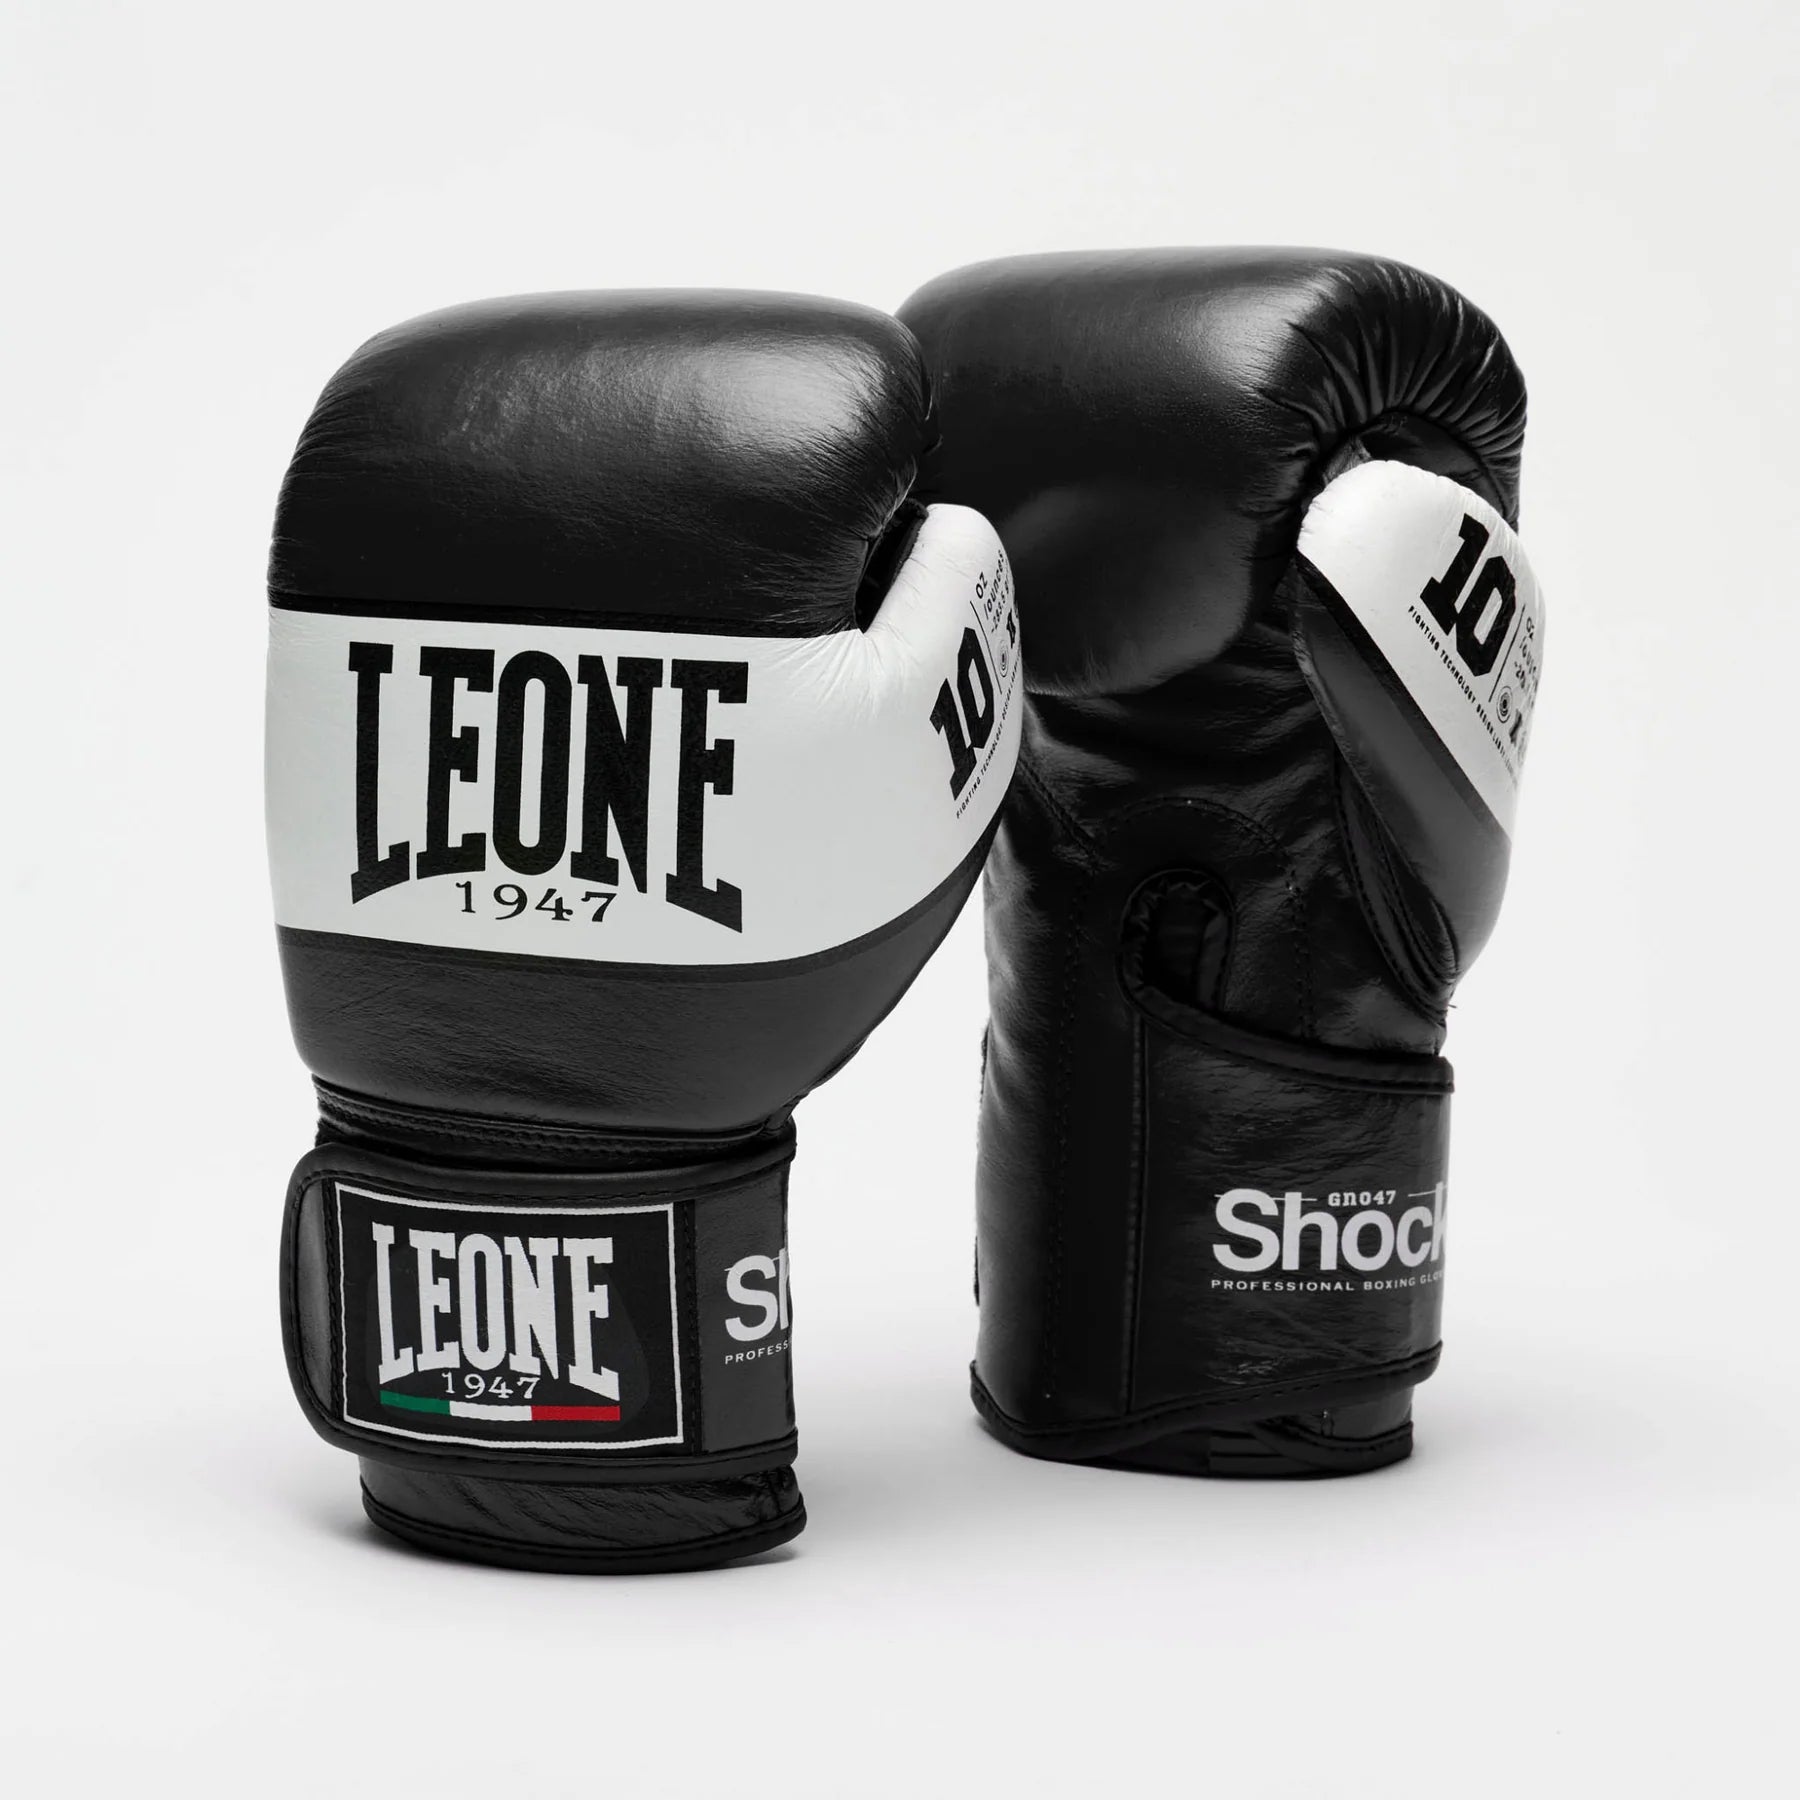  Black Firday Leone 1947® North America AUTHENTIC  BOXING GLOVES